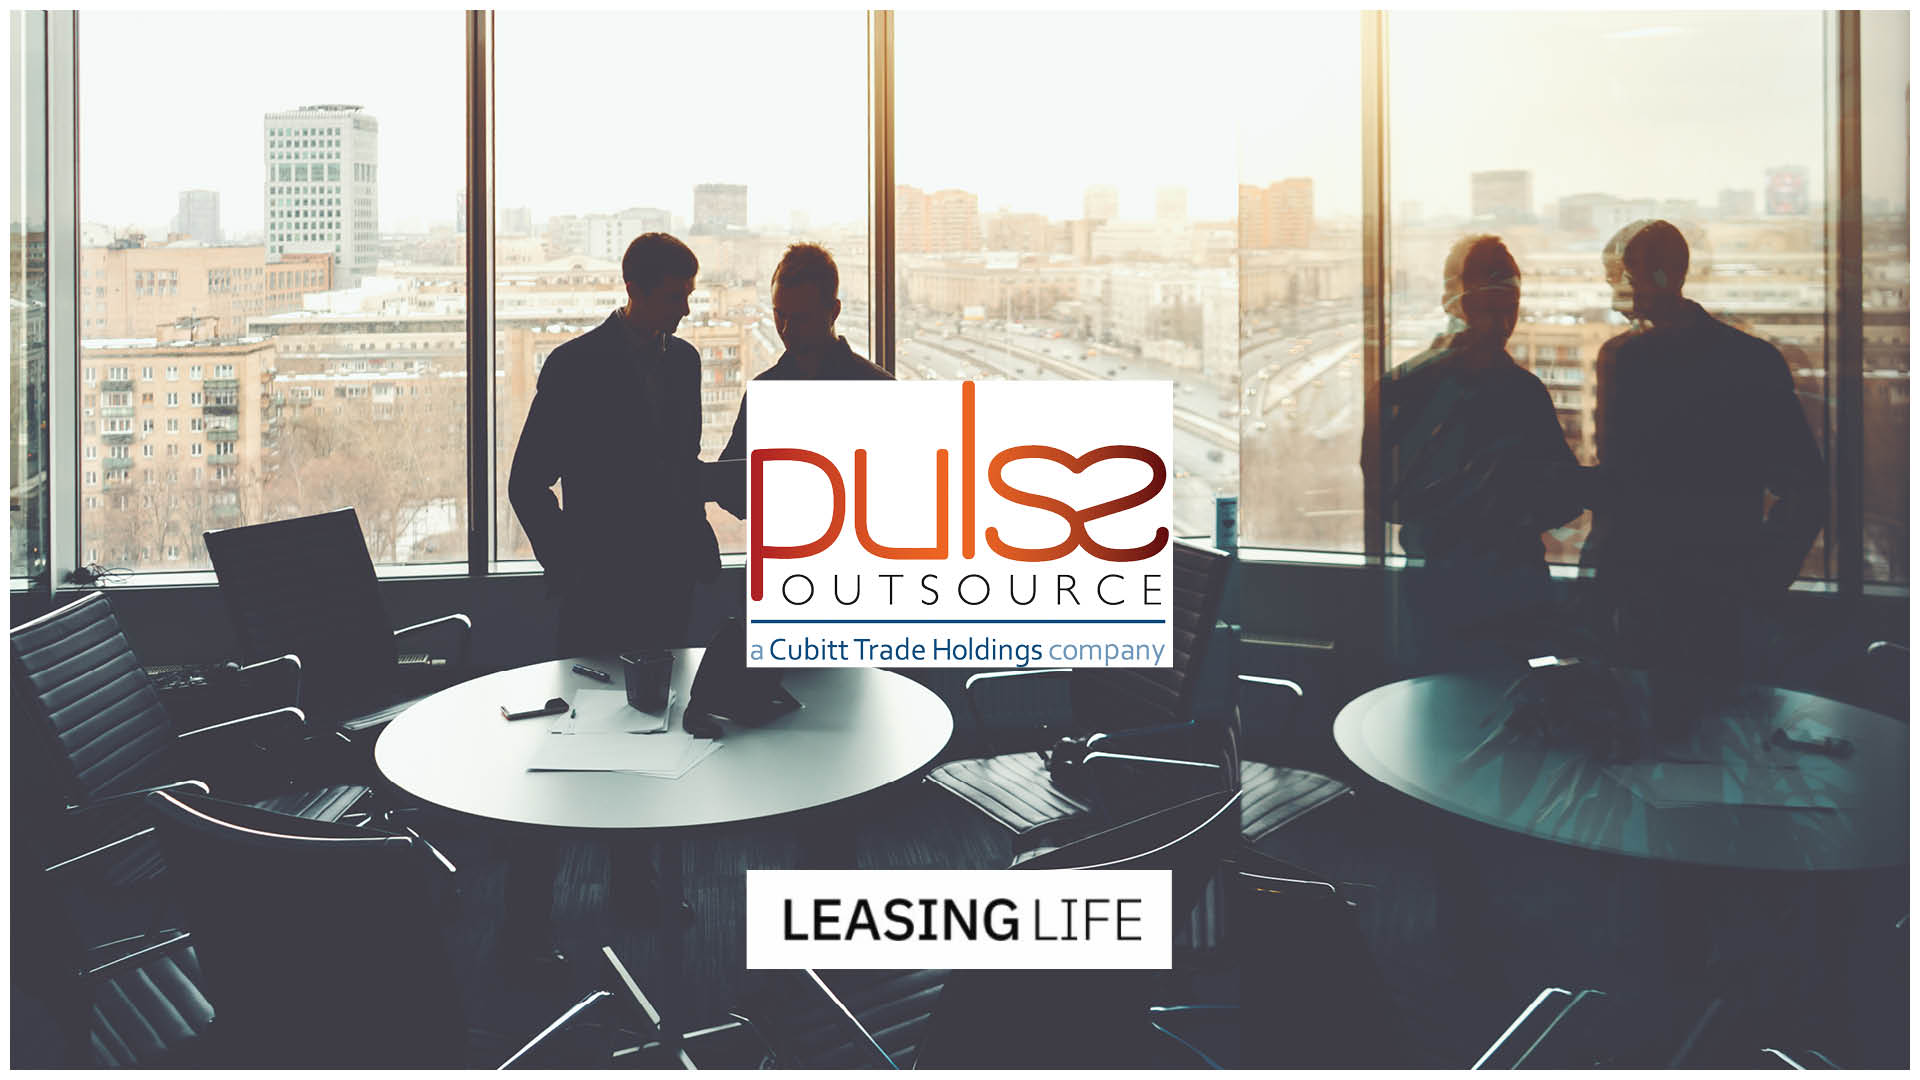 Pulse Outsource appoints Helen Wheeler as managing director